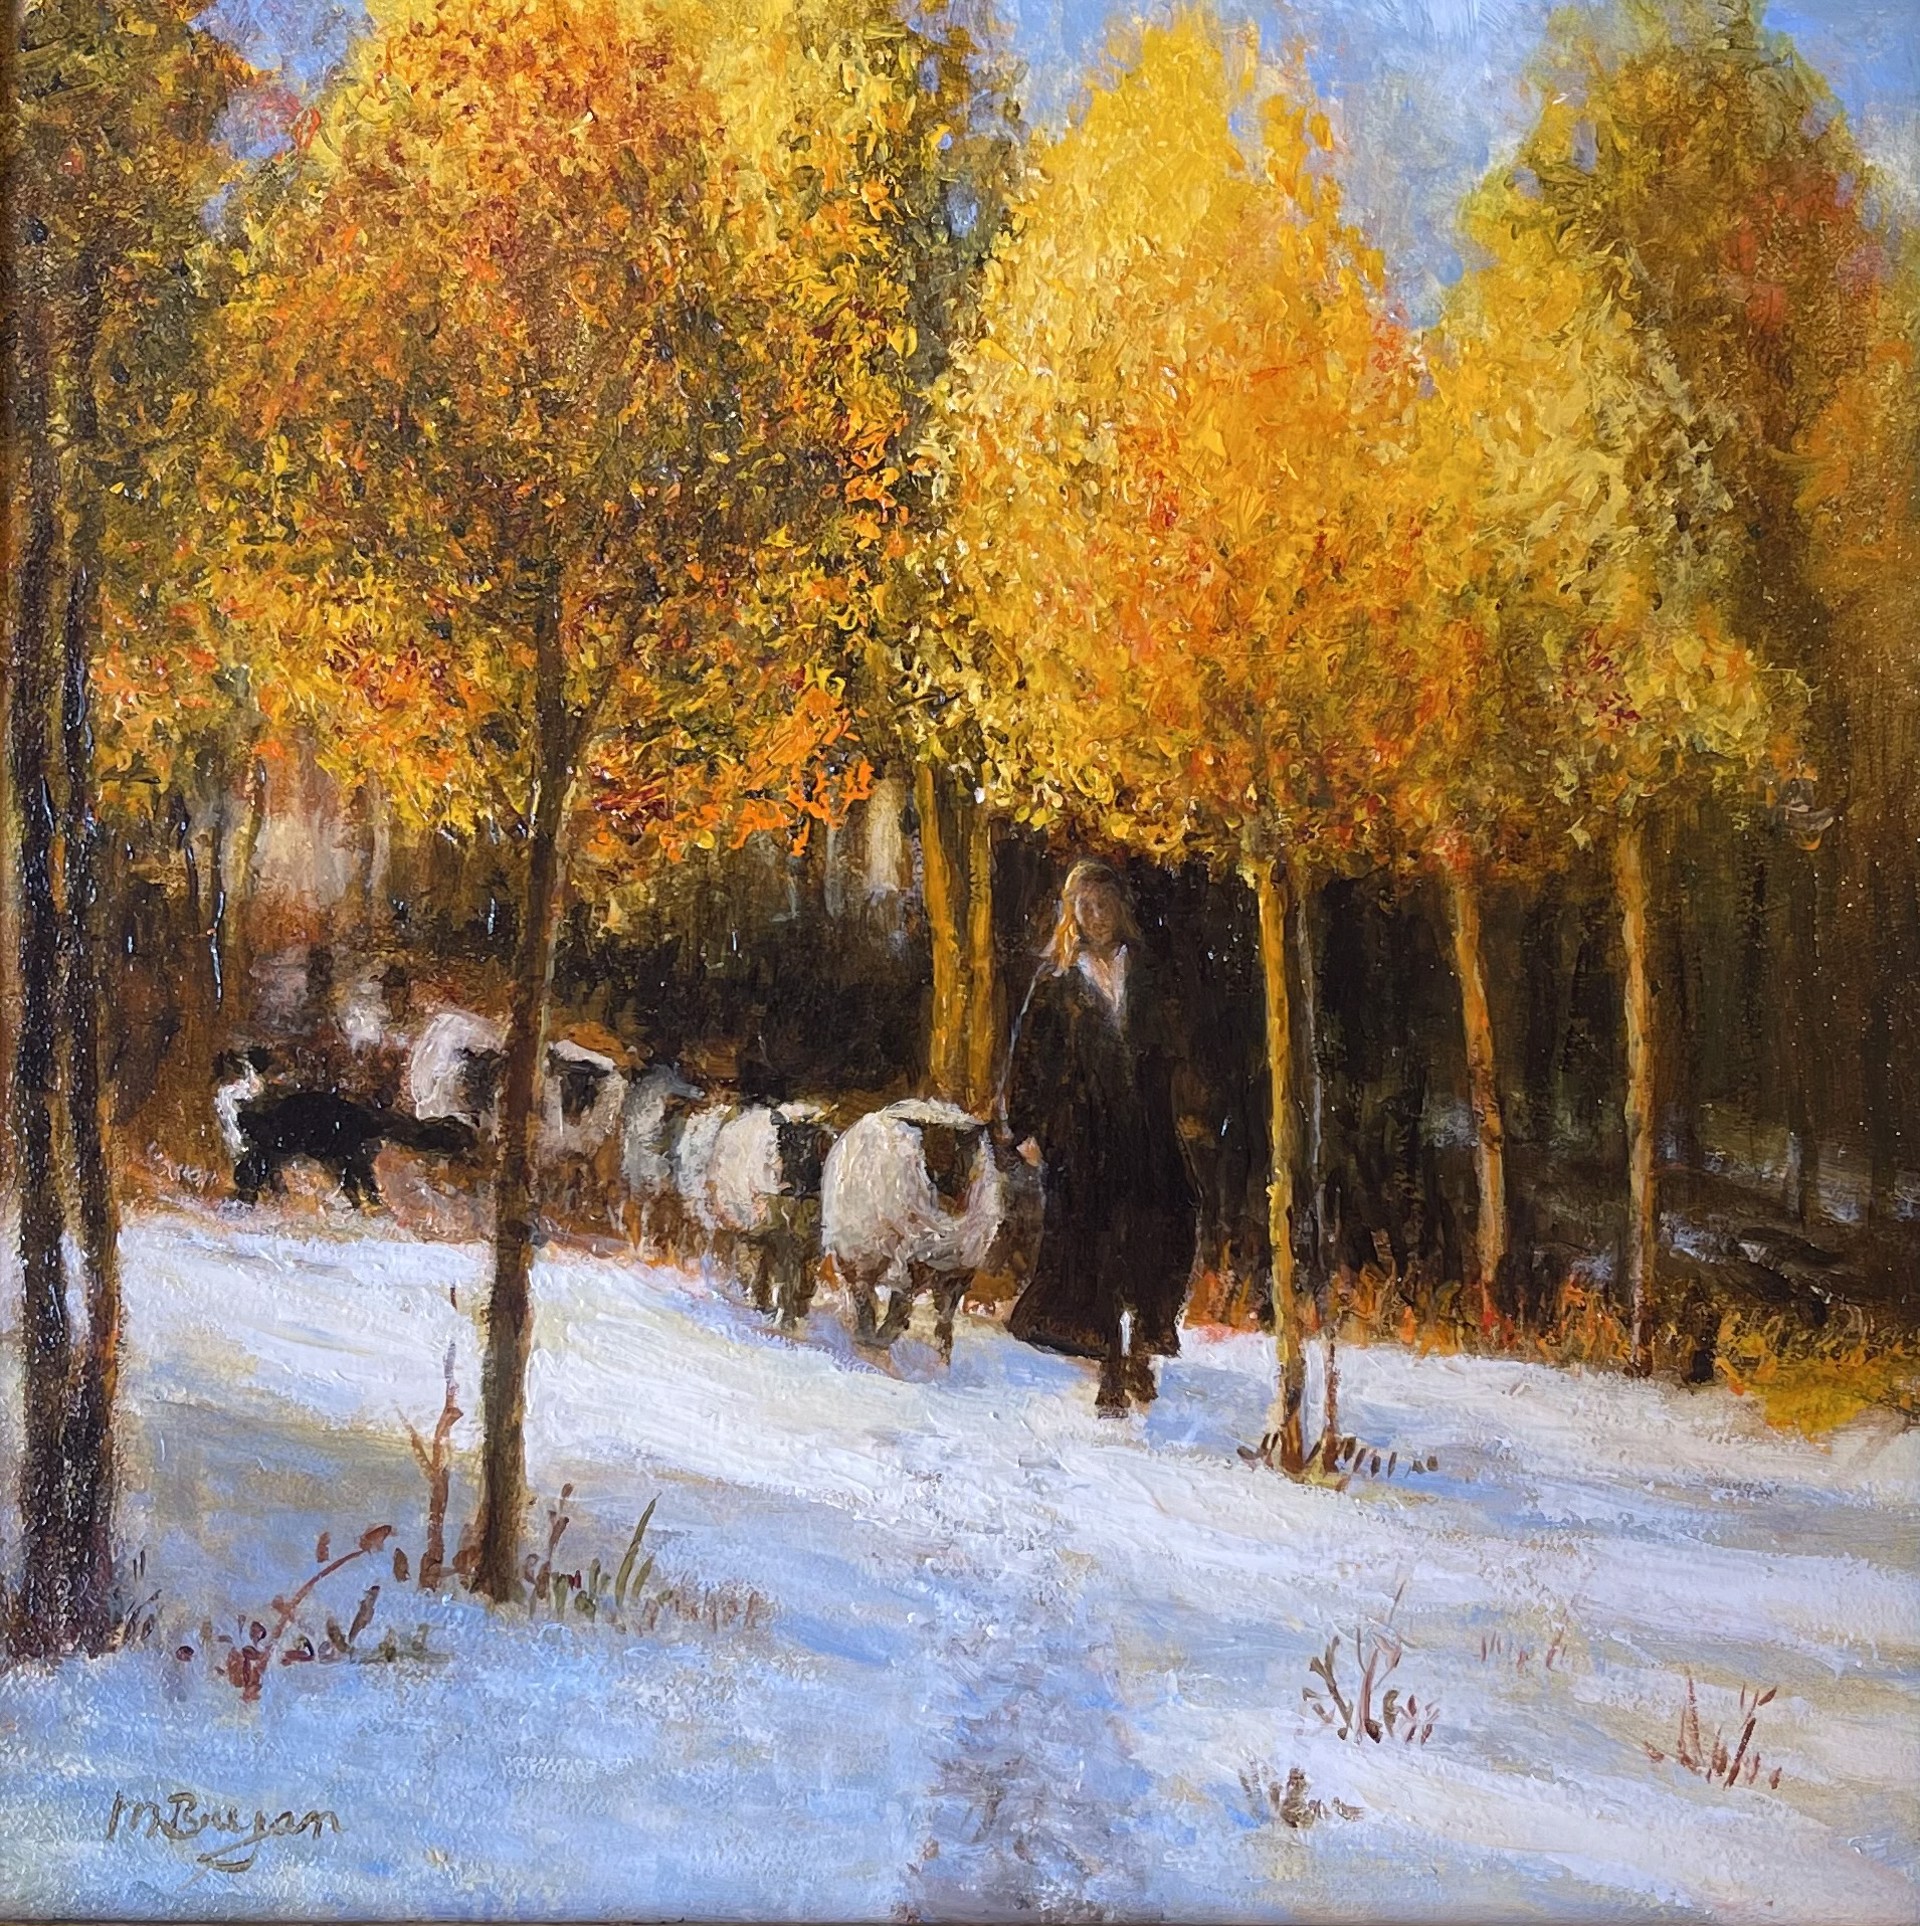 On the Way Home, First Snow by Malcolm Bryan